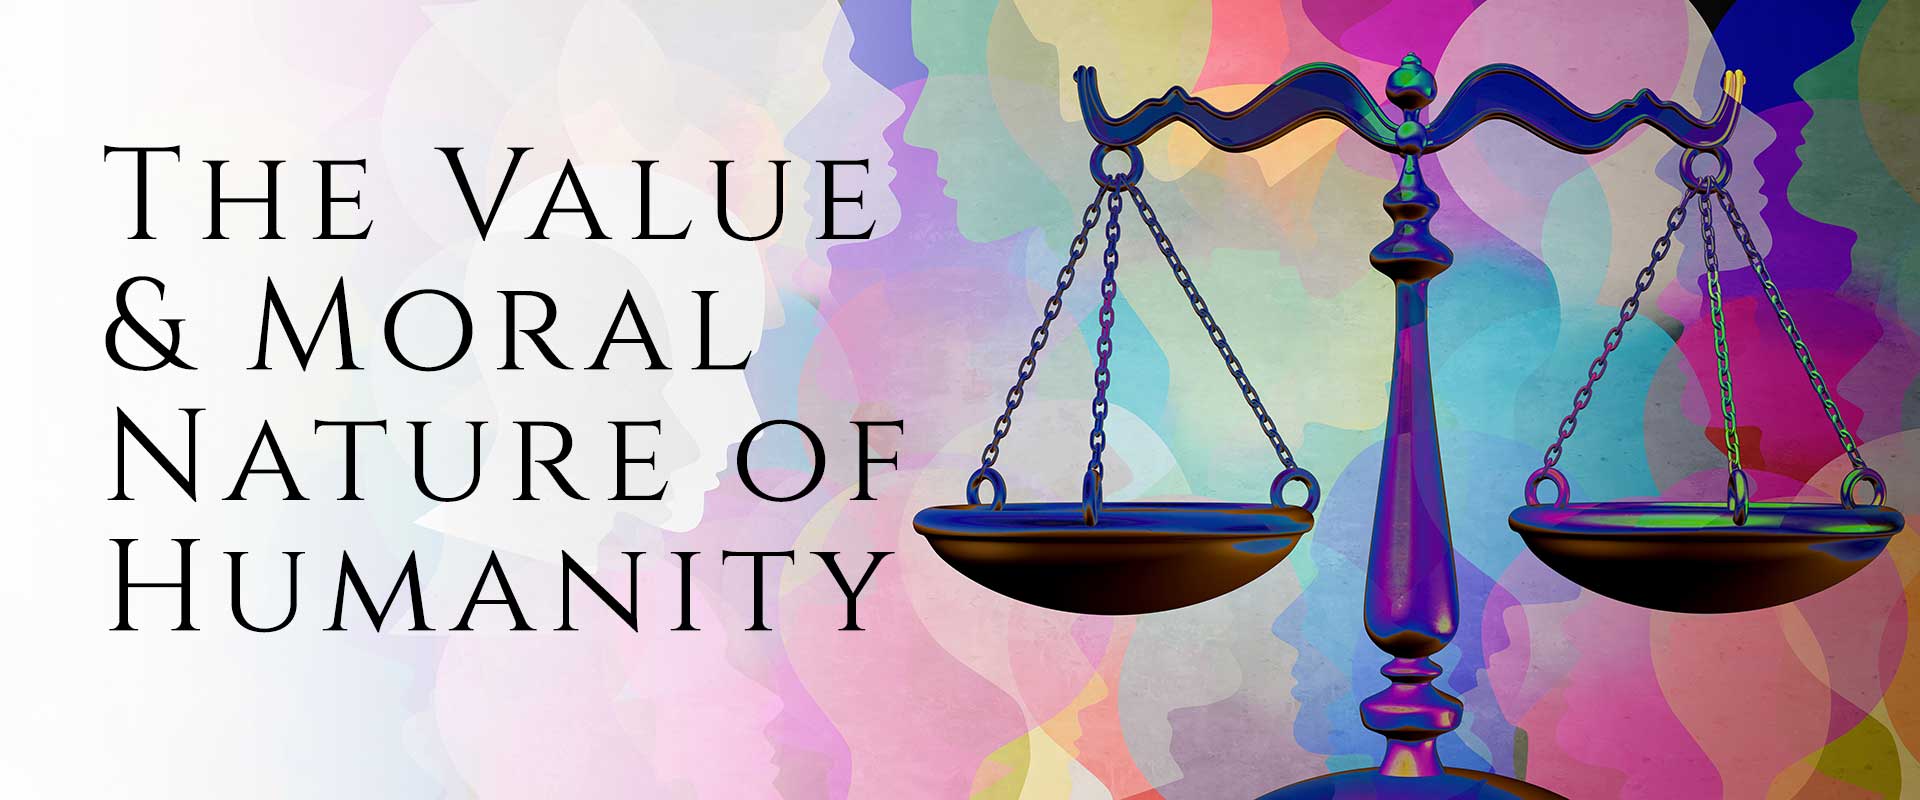 Volume V: The Value and Moral Nature of Humanity